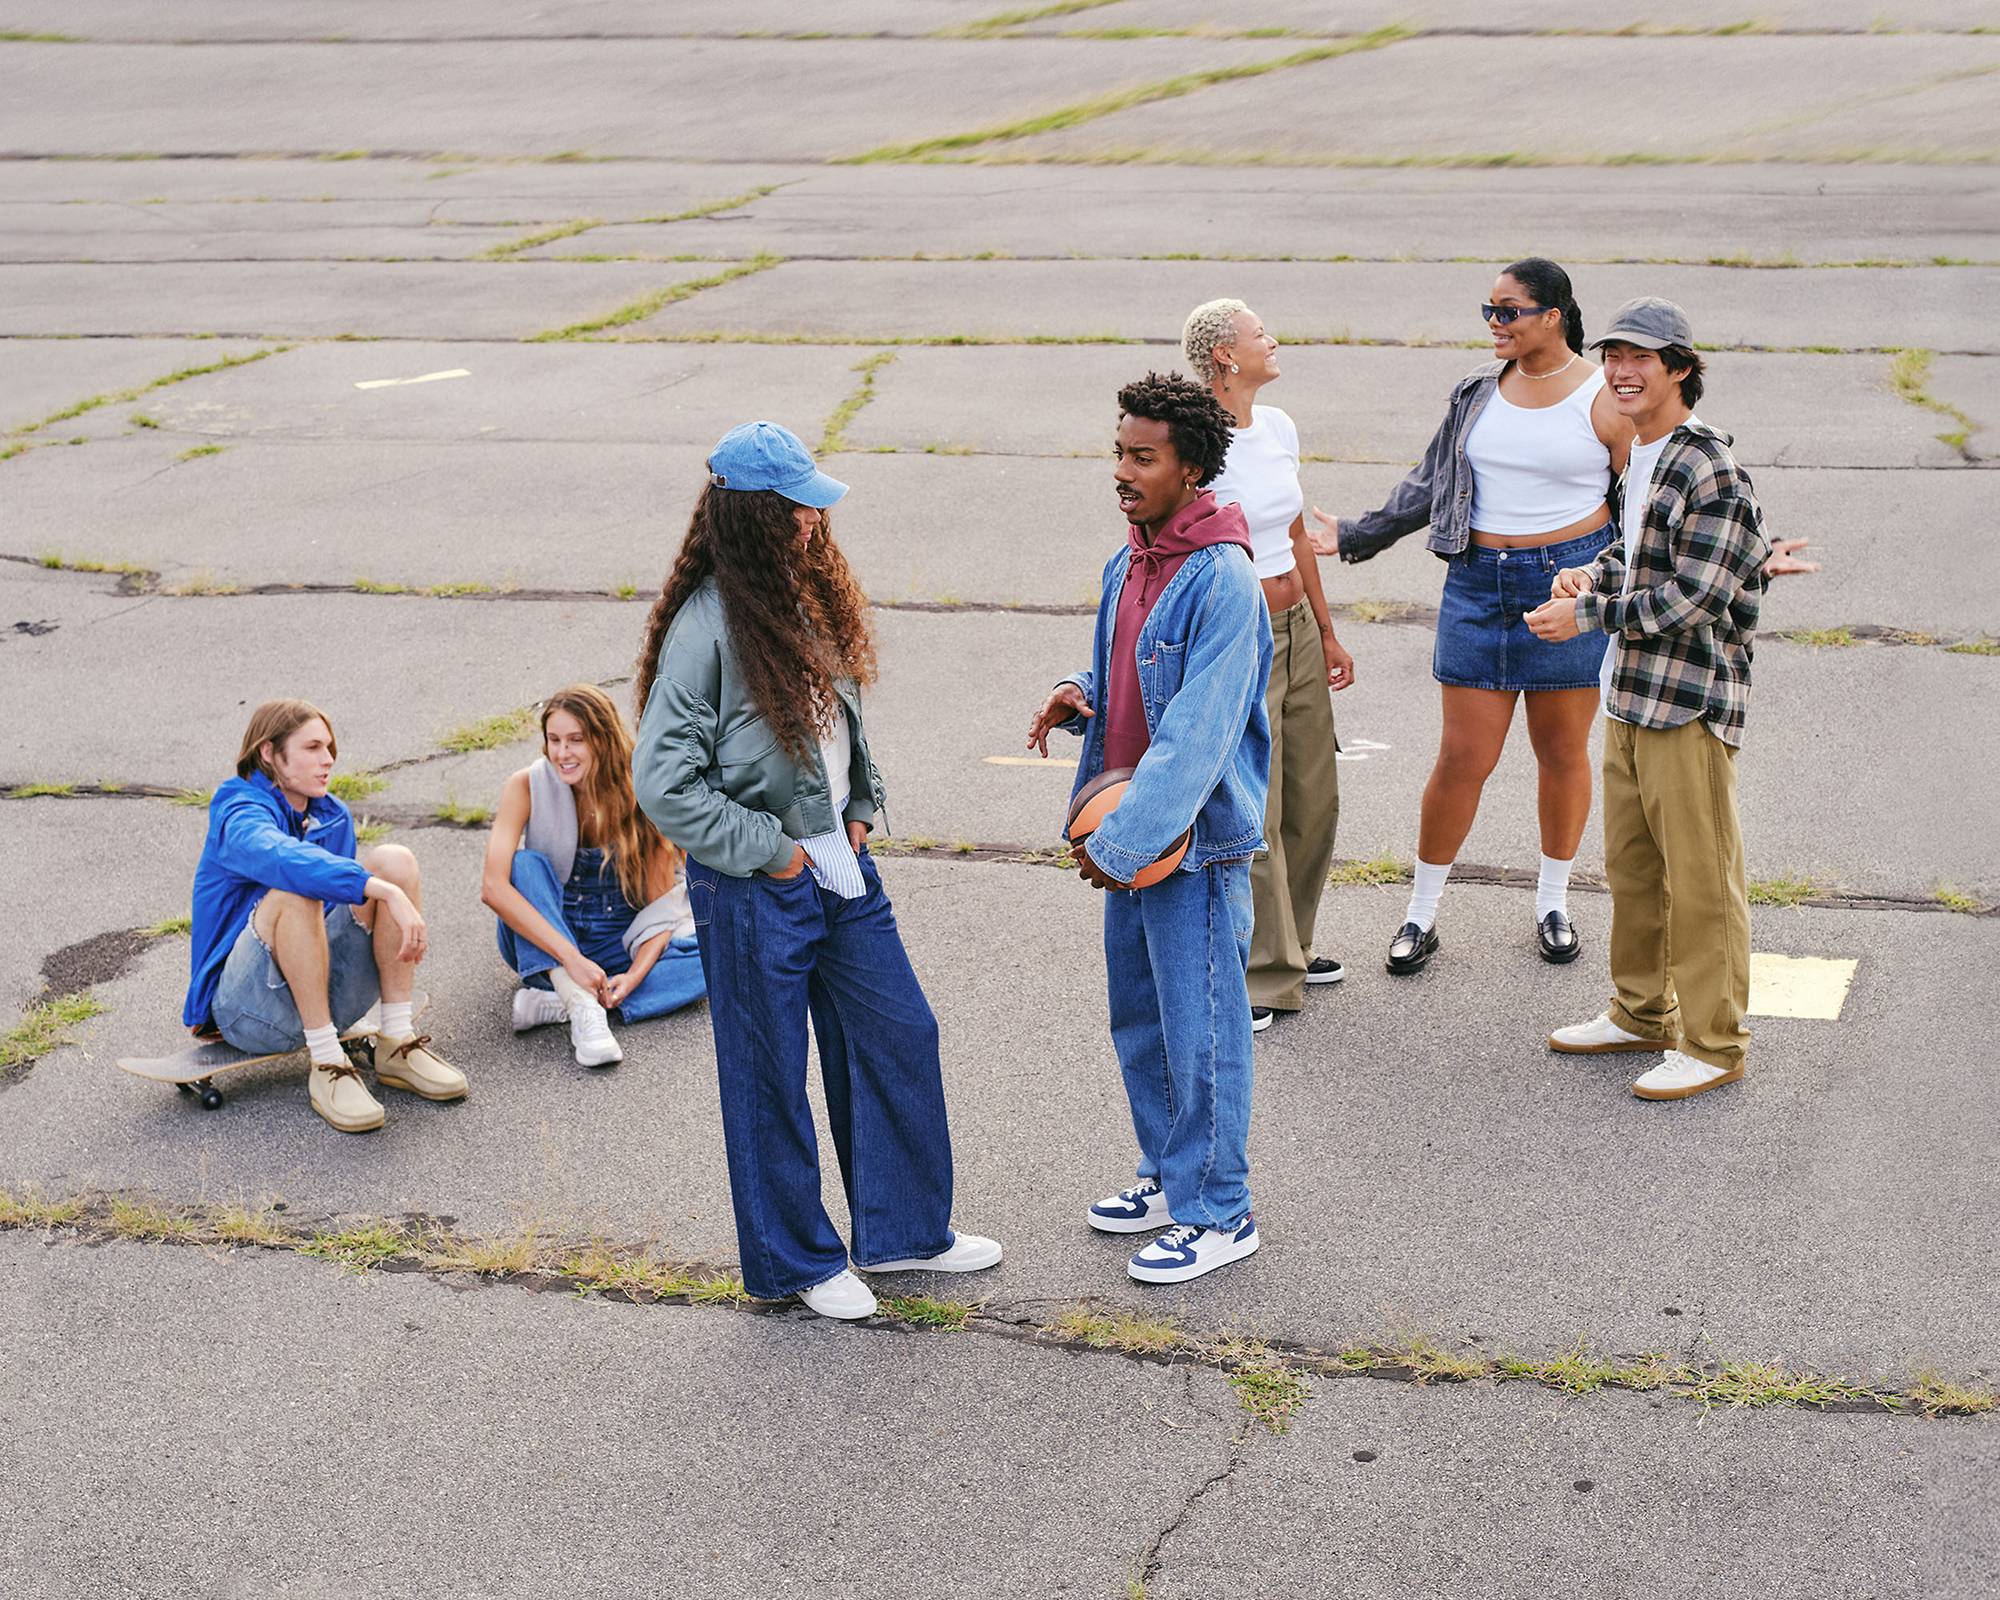 Large group shot of models outdoors in concrete lot wearing assorted denim looks and casual streetwear